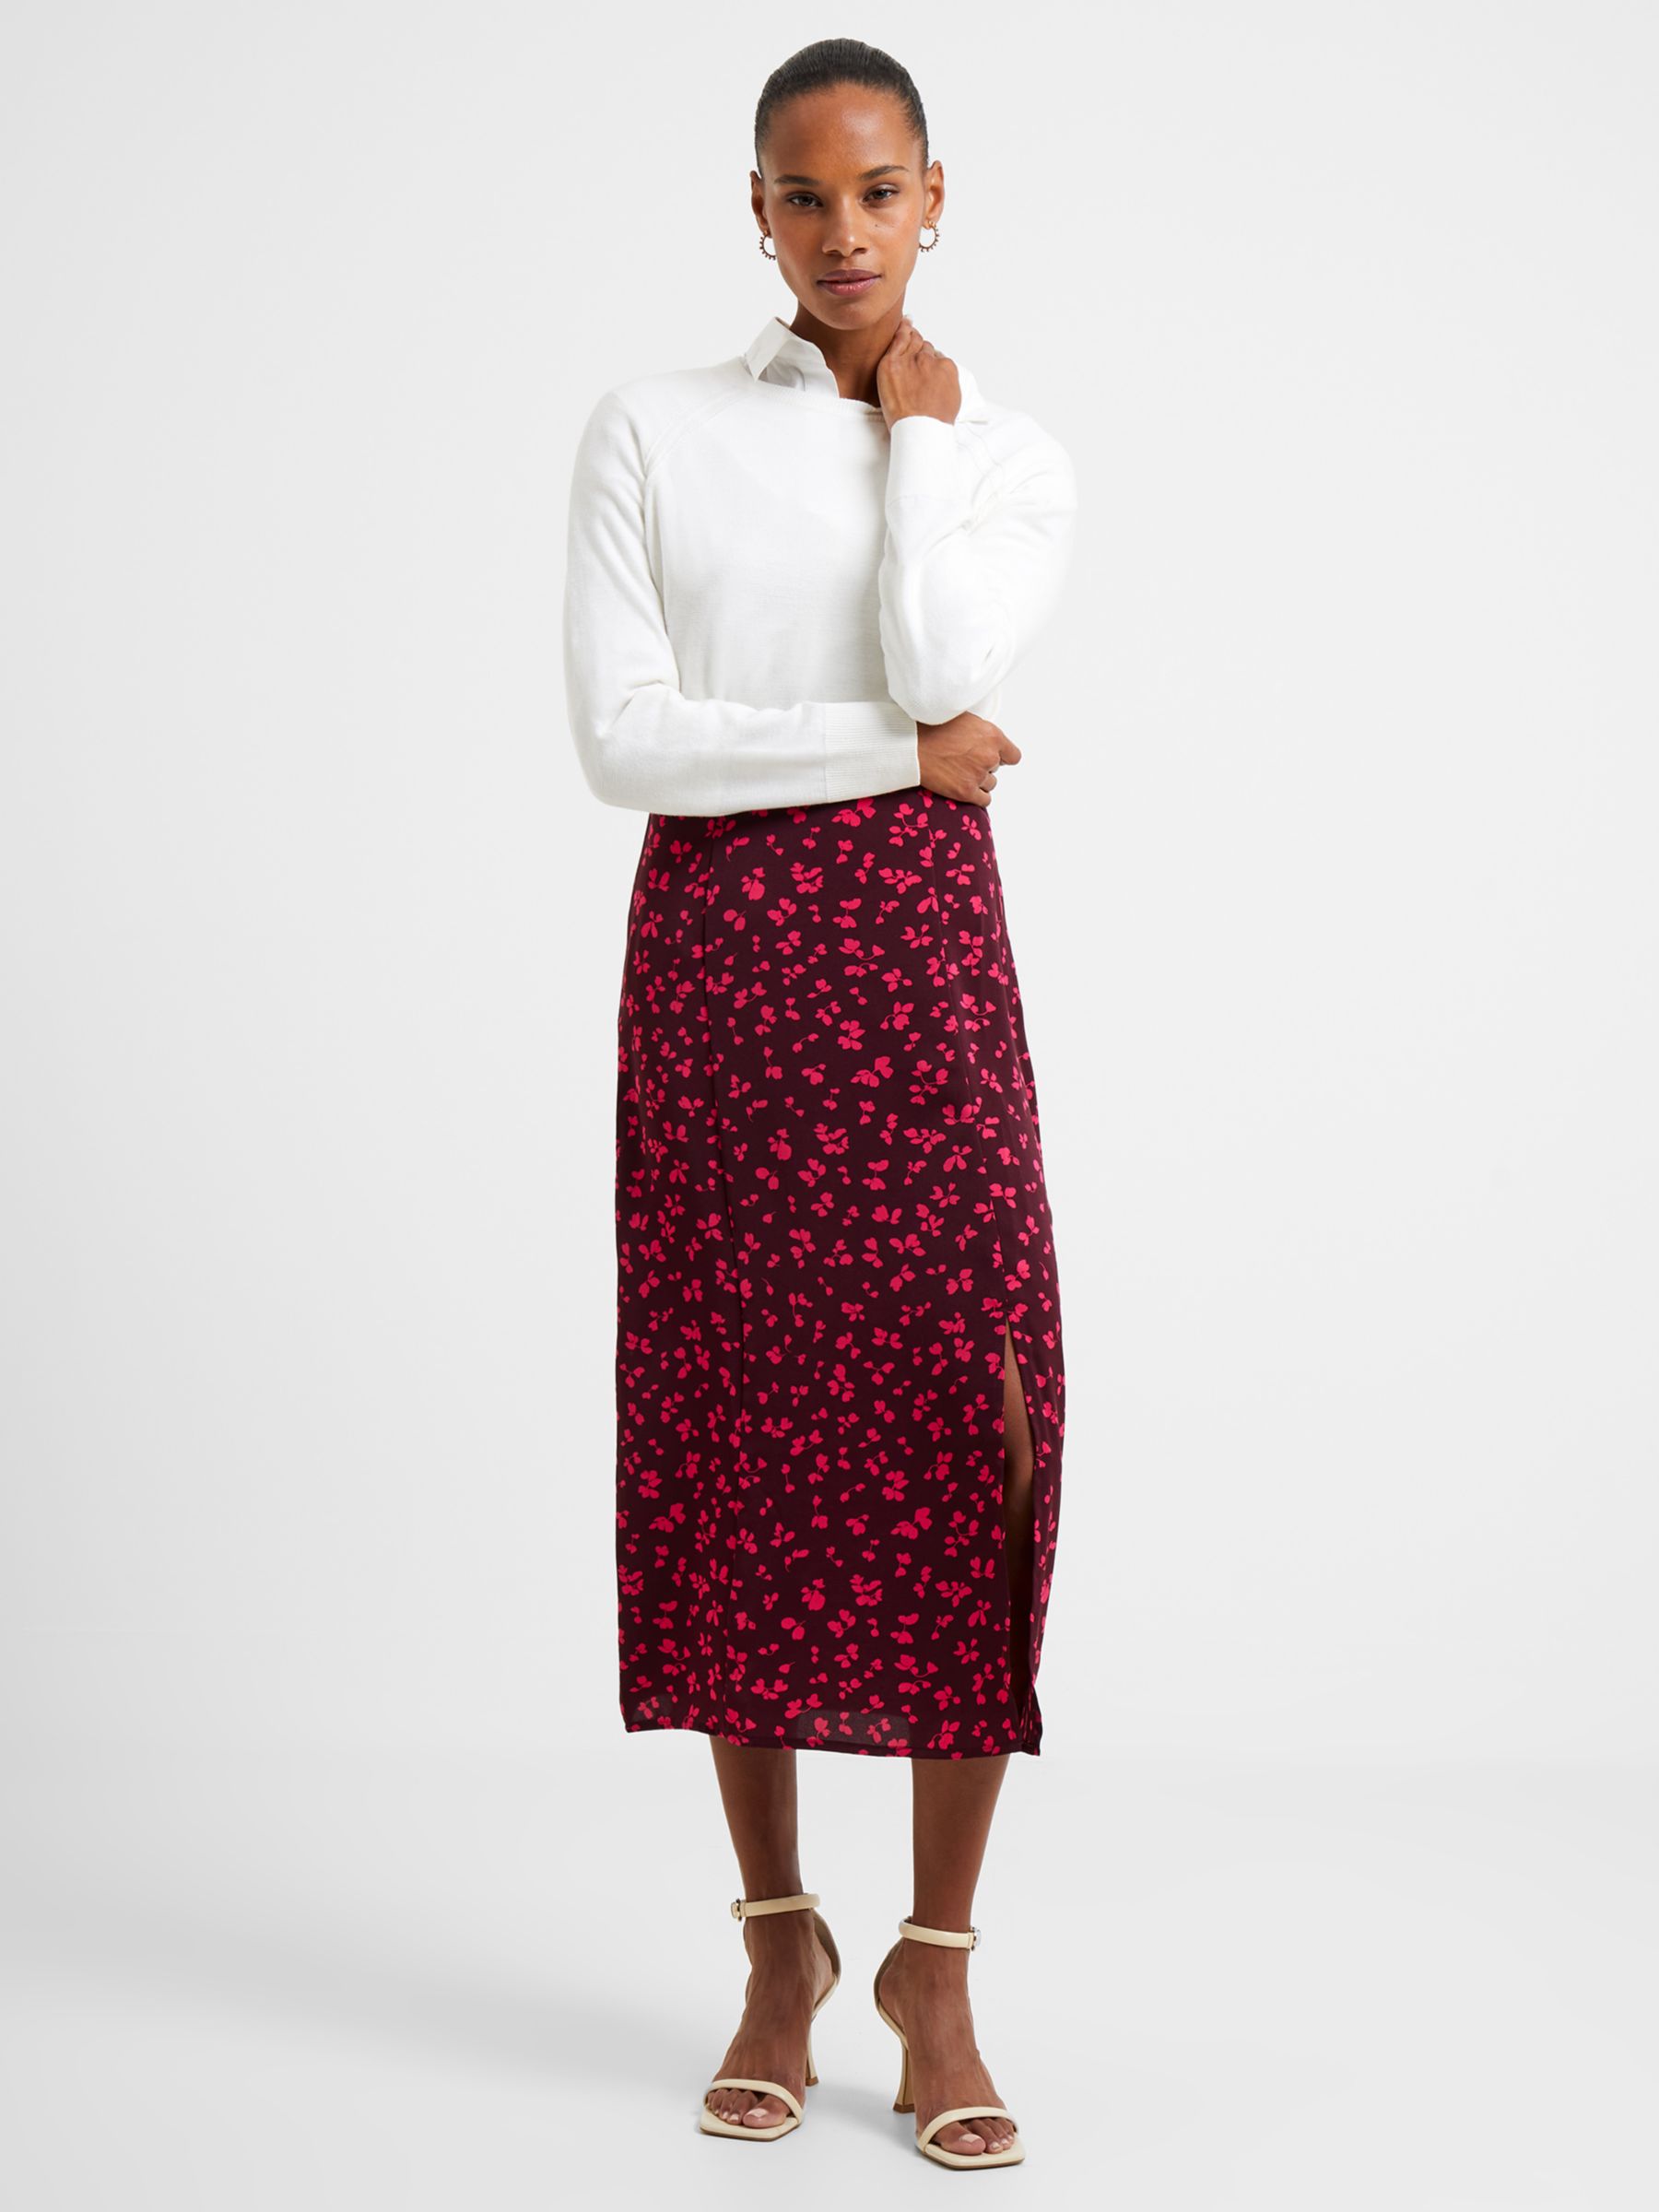 French Connection Split Skirt, Plum/Hotpink, 14